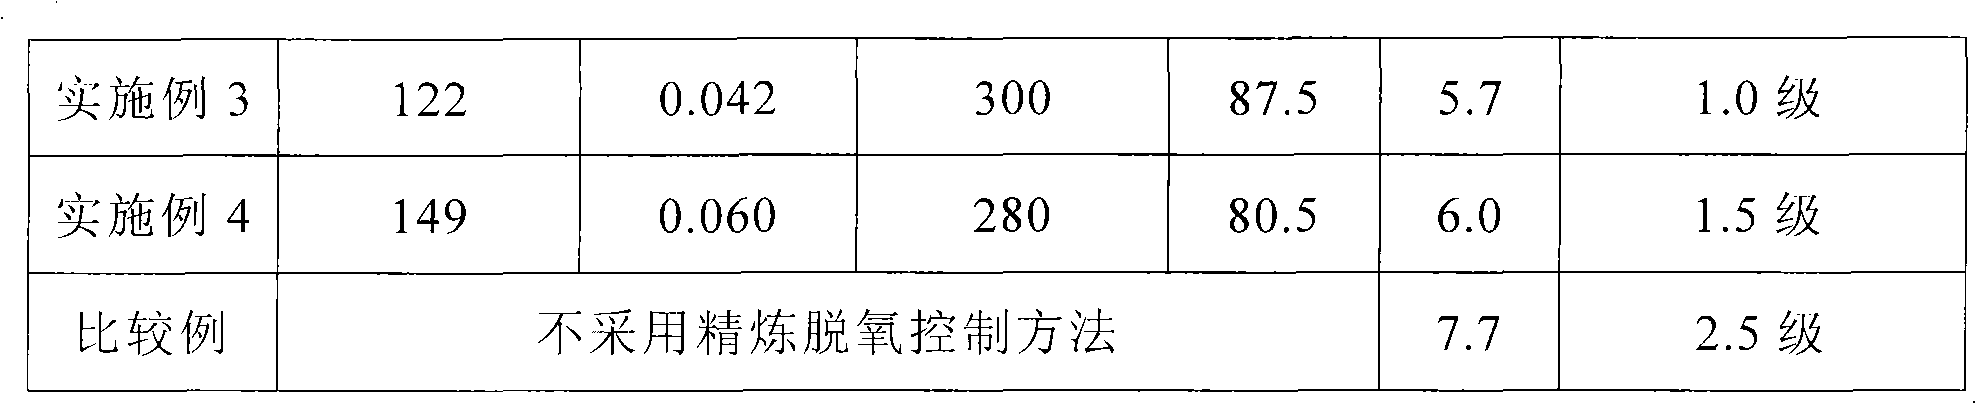 Non-oriented silicon steel RH refinement and deoxidation control method